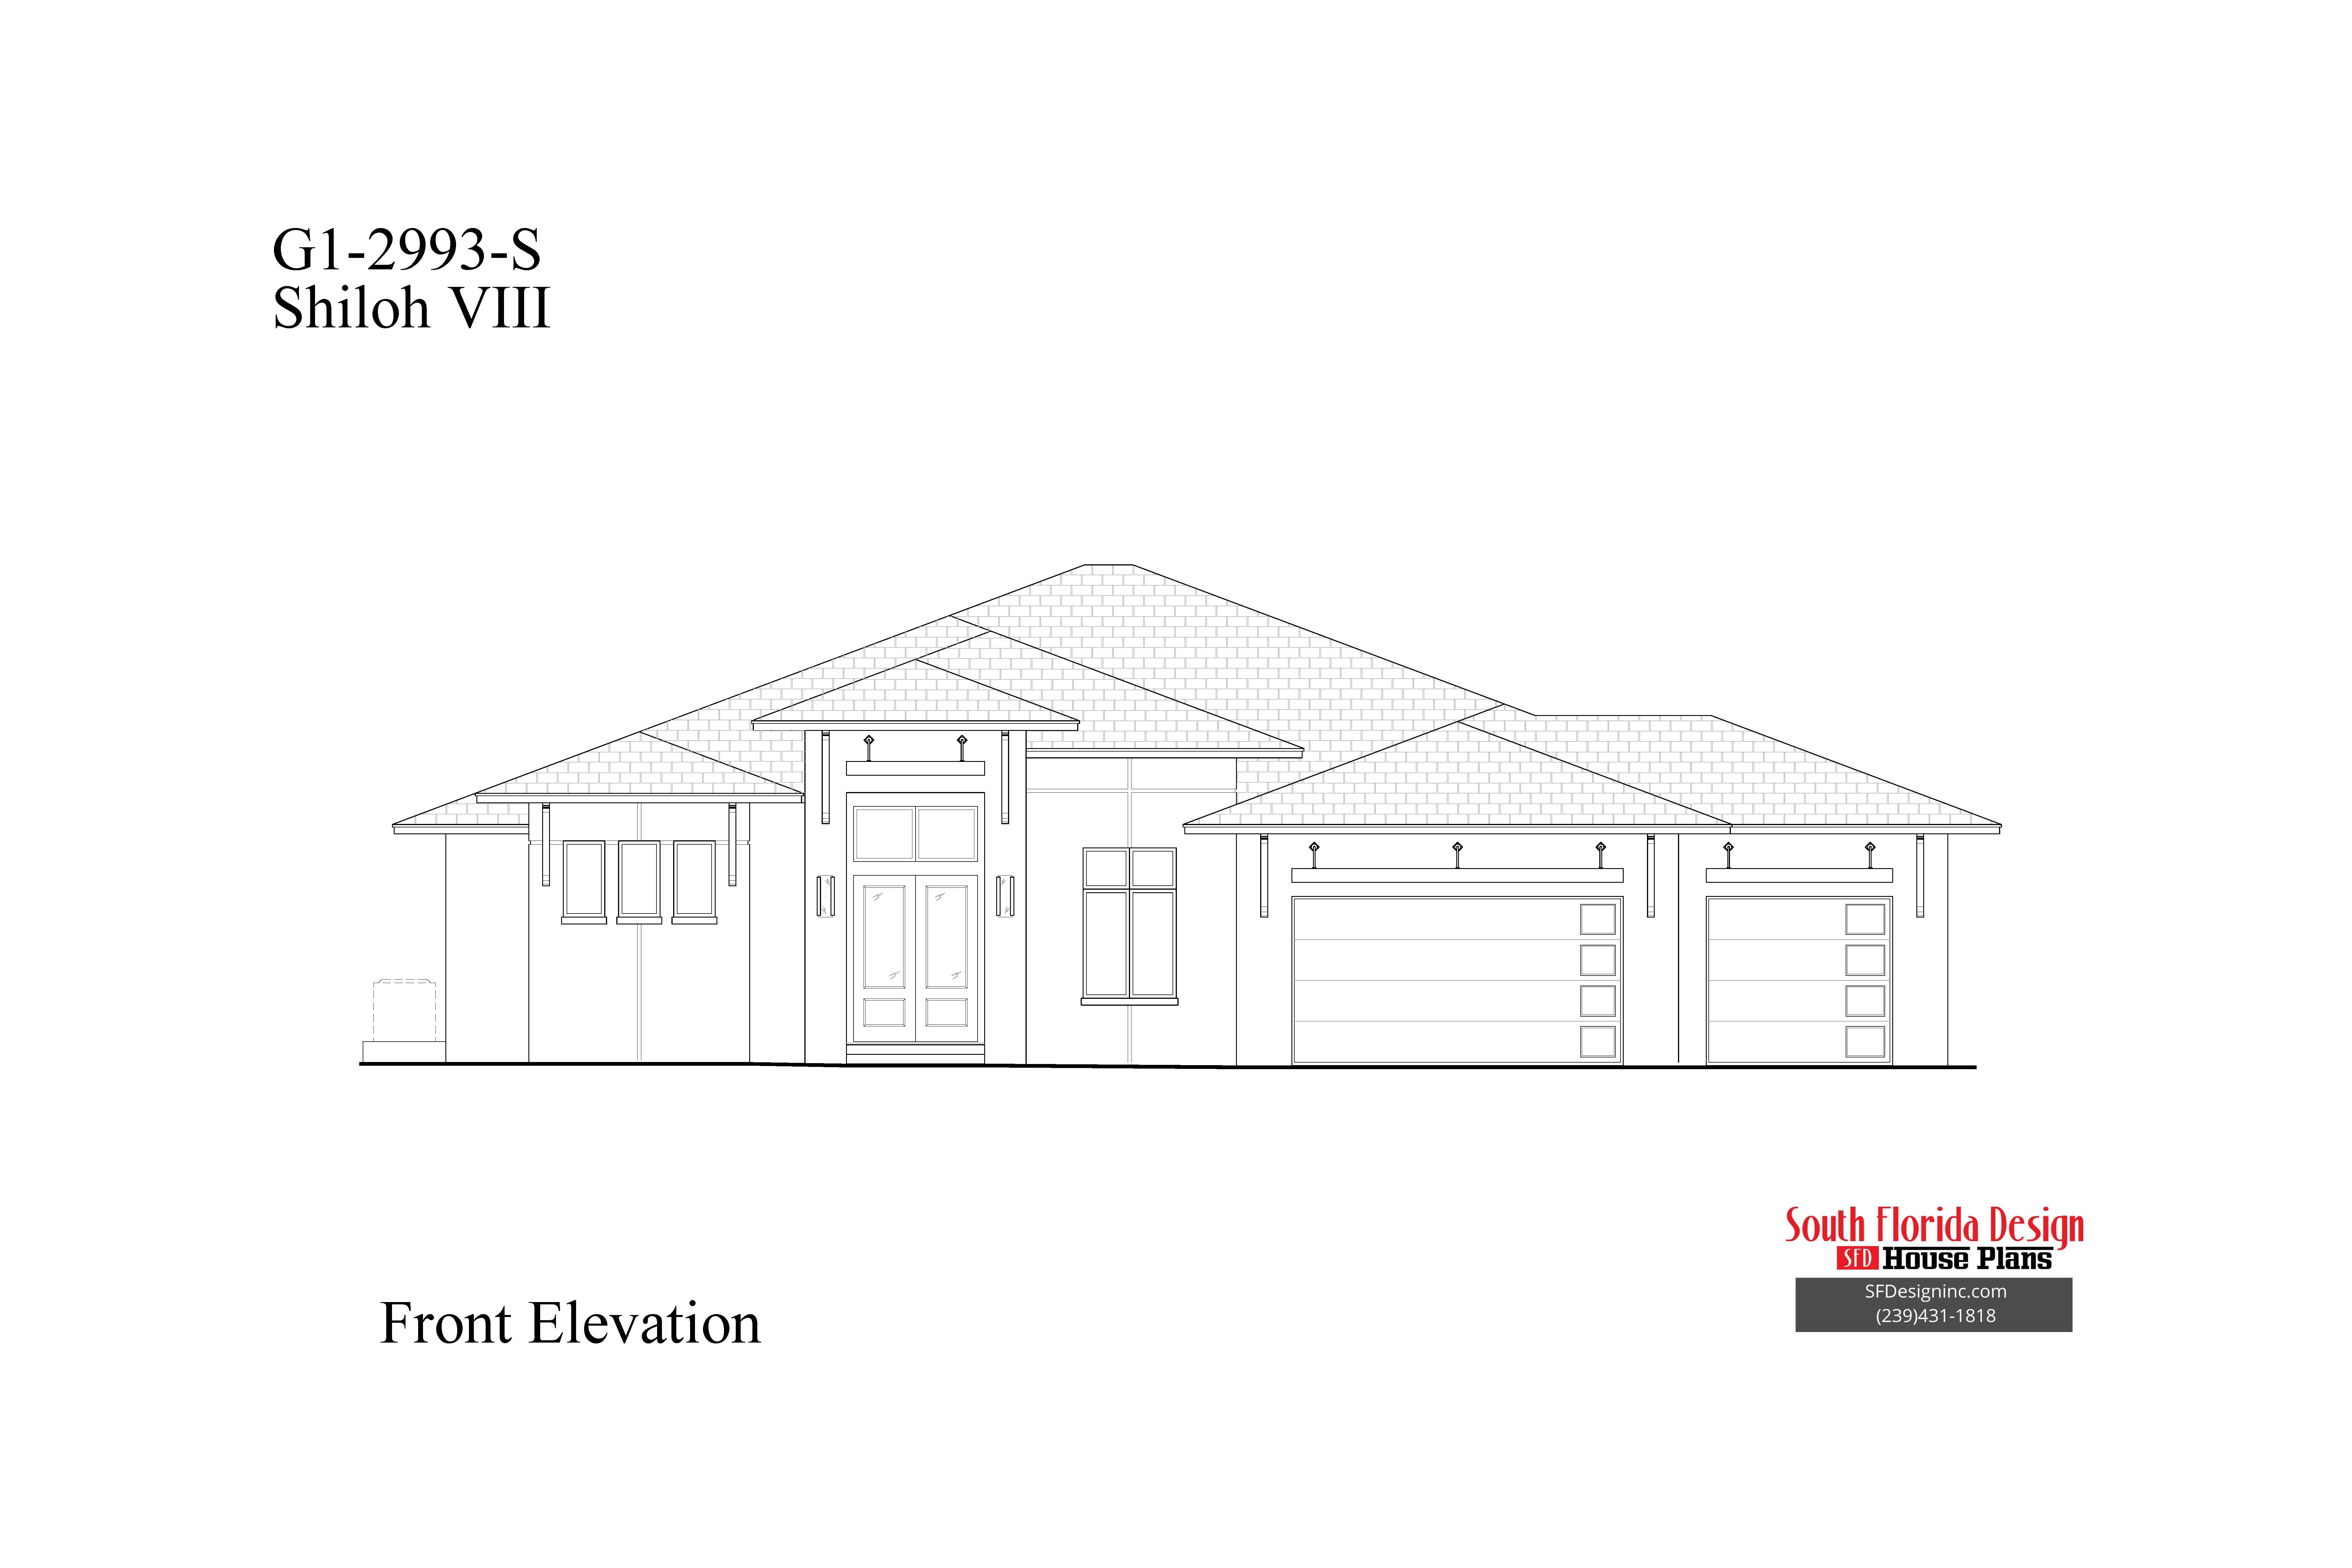 Black and white front elevation sketch of the Shiloh VIII house plan